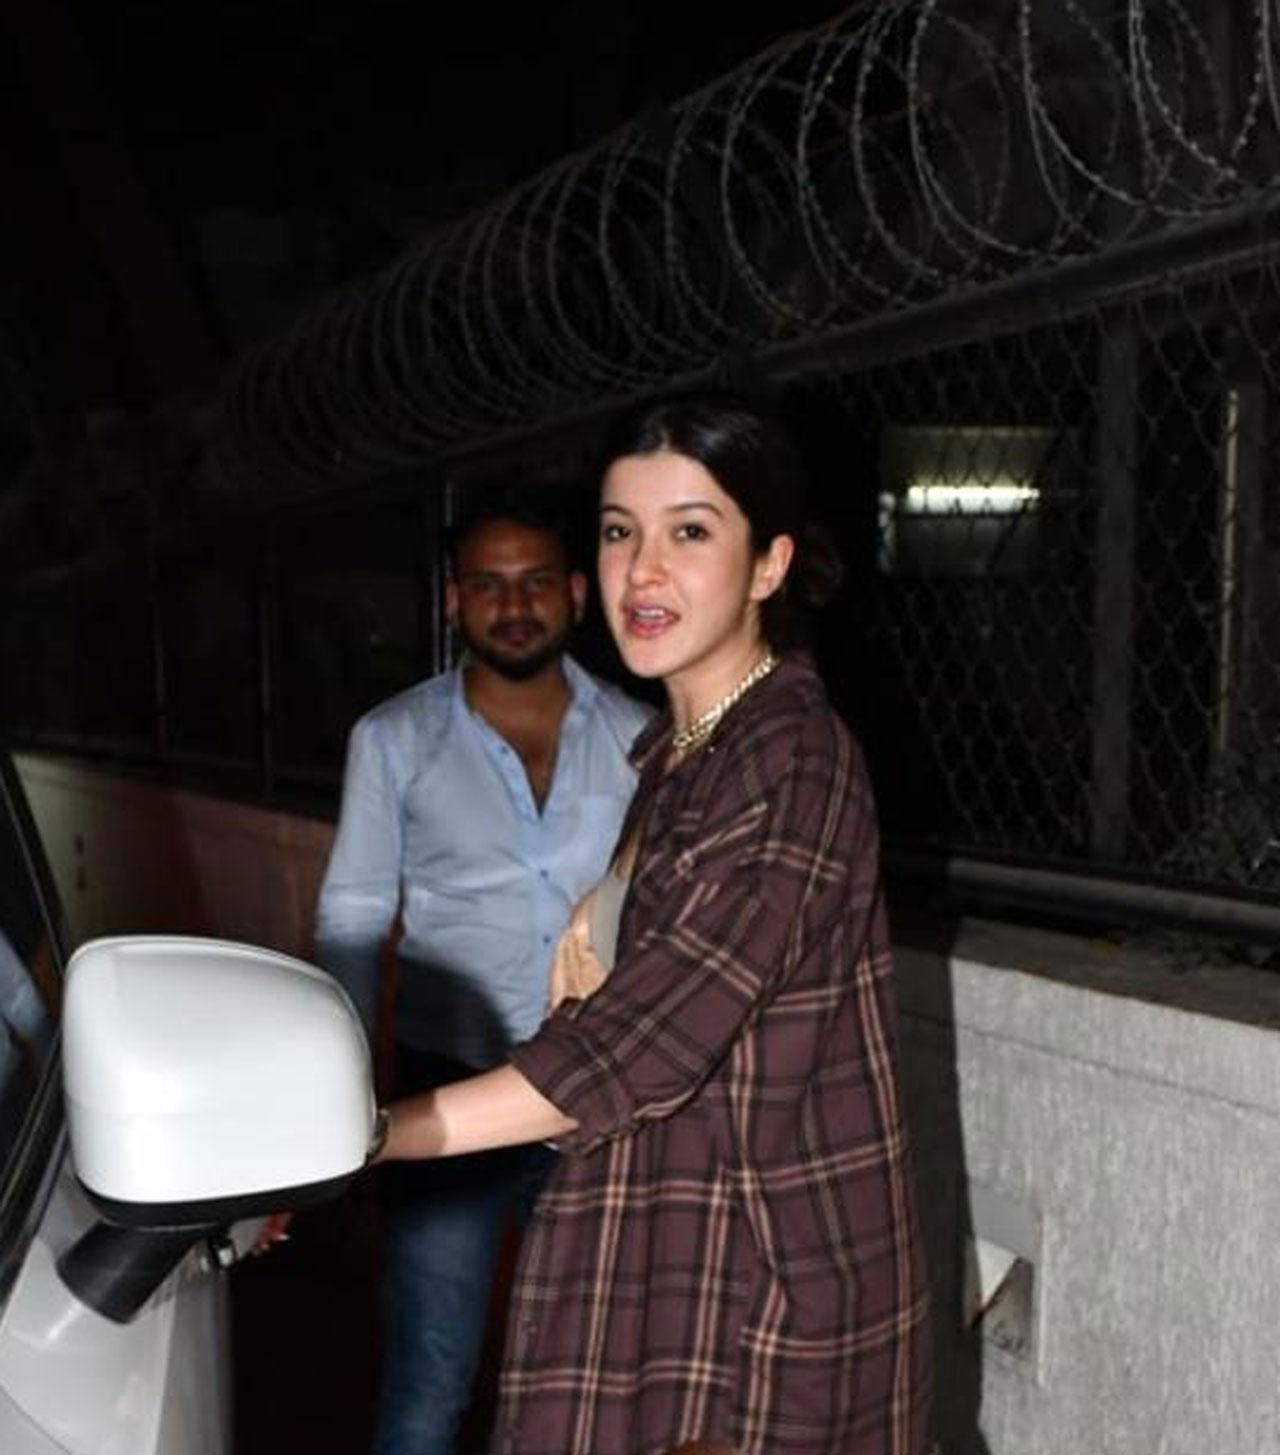 Also spotted was Shanaya Kapoor. Sanjay Kapoor's daughter is all set to make her acting debut with the film titled 'Bedhadak'. 'Bedhadak' is presented by Karan Johar and helmed by Shashank Khaitan. Sharing the update, Shanaya took to Instagram and unveiled her first look from the film.




